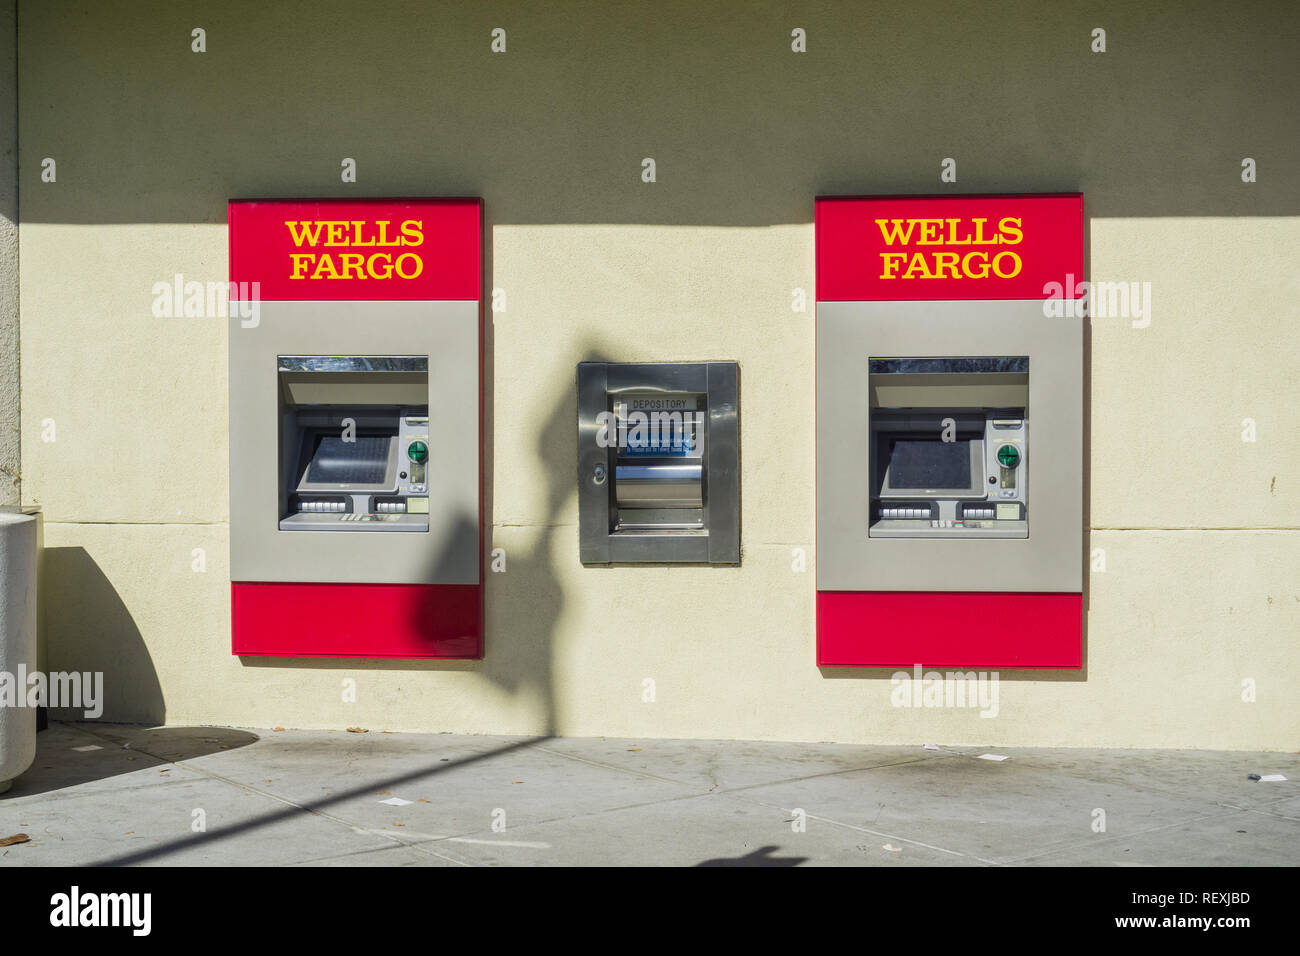 October 26, 2017 Sunnyvale/California - Wells Fargo ATM's at the local branch Stock Photo